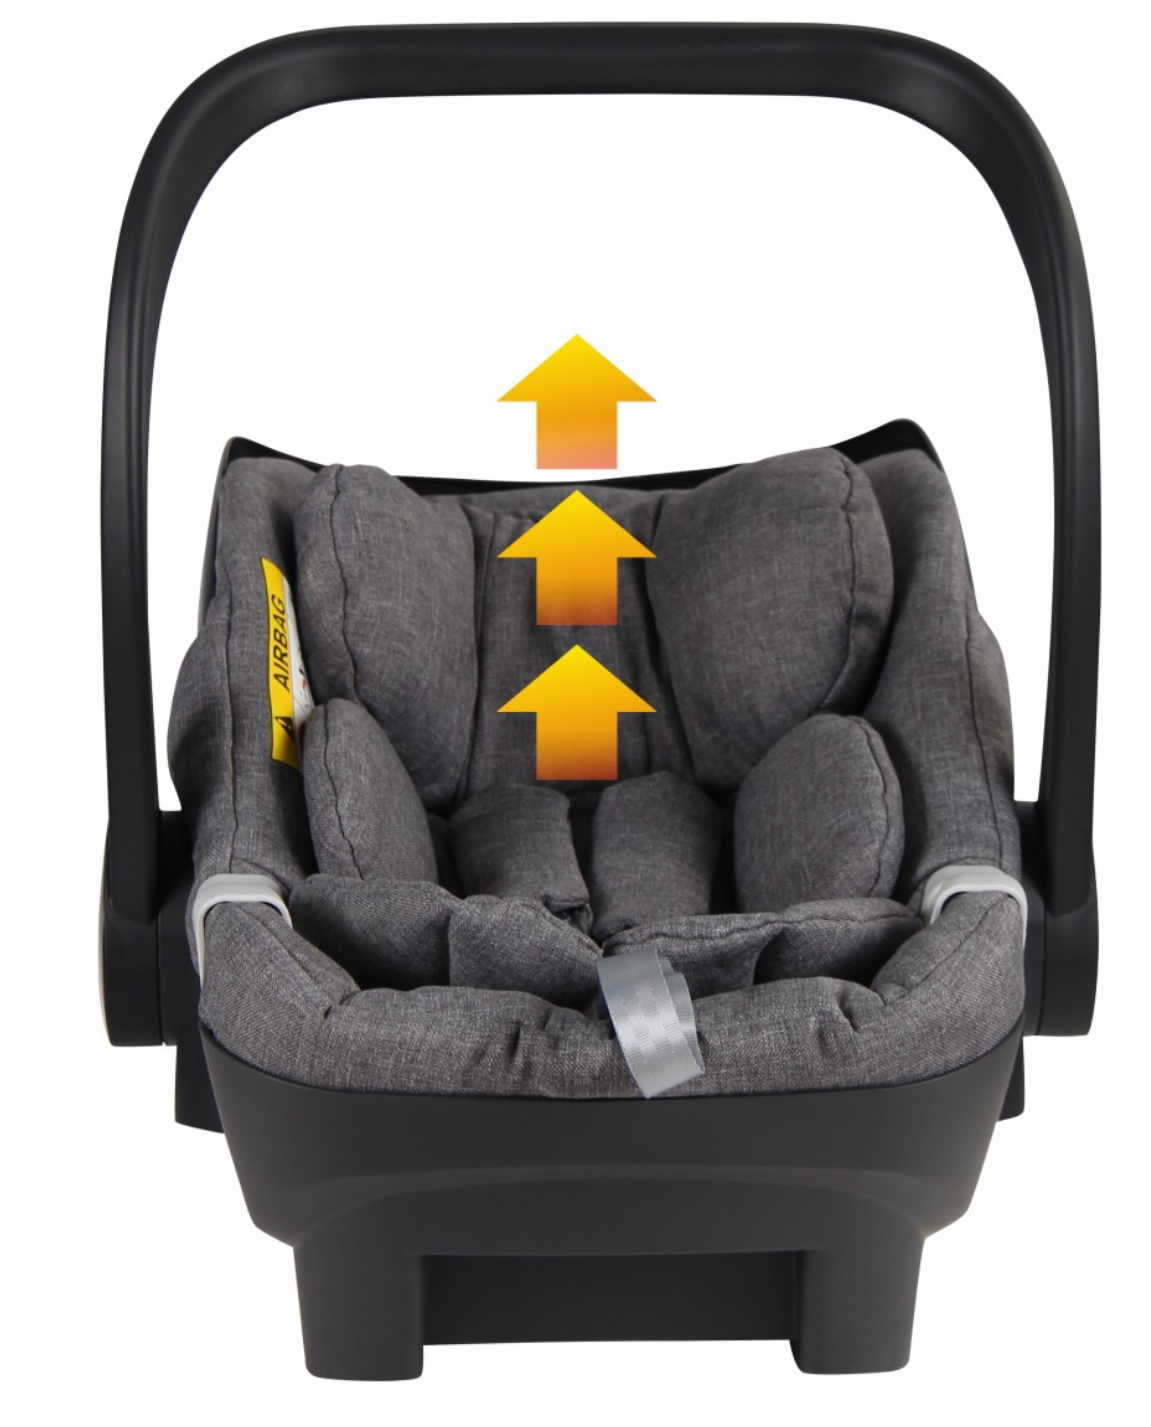 I-Size Approved Infant Car Seat